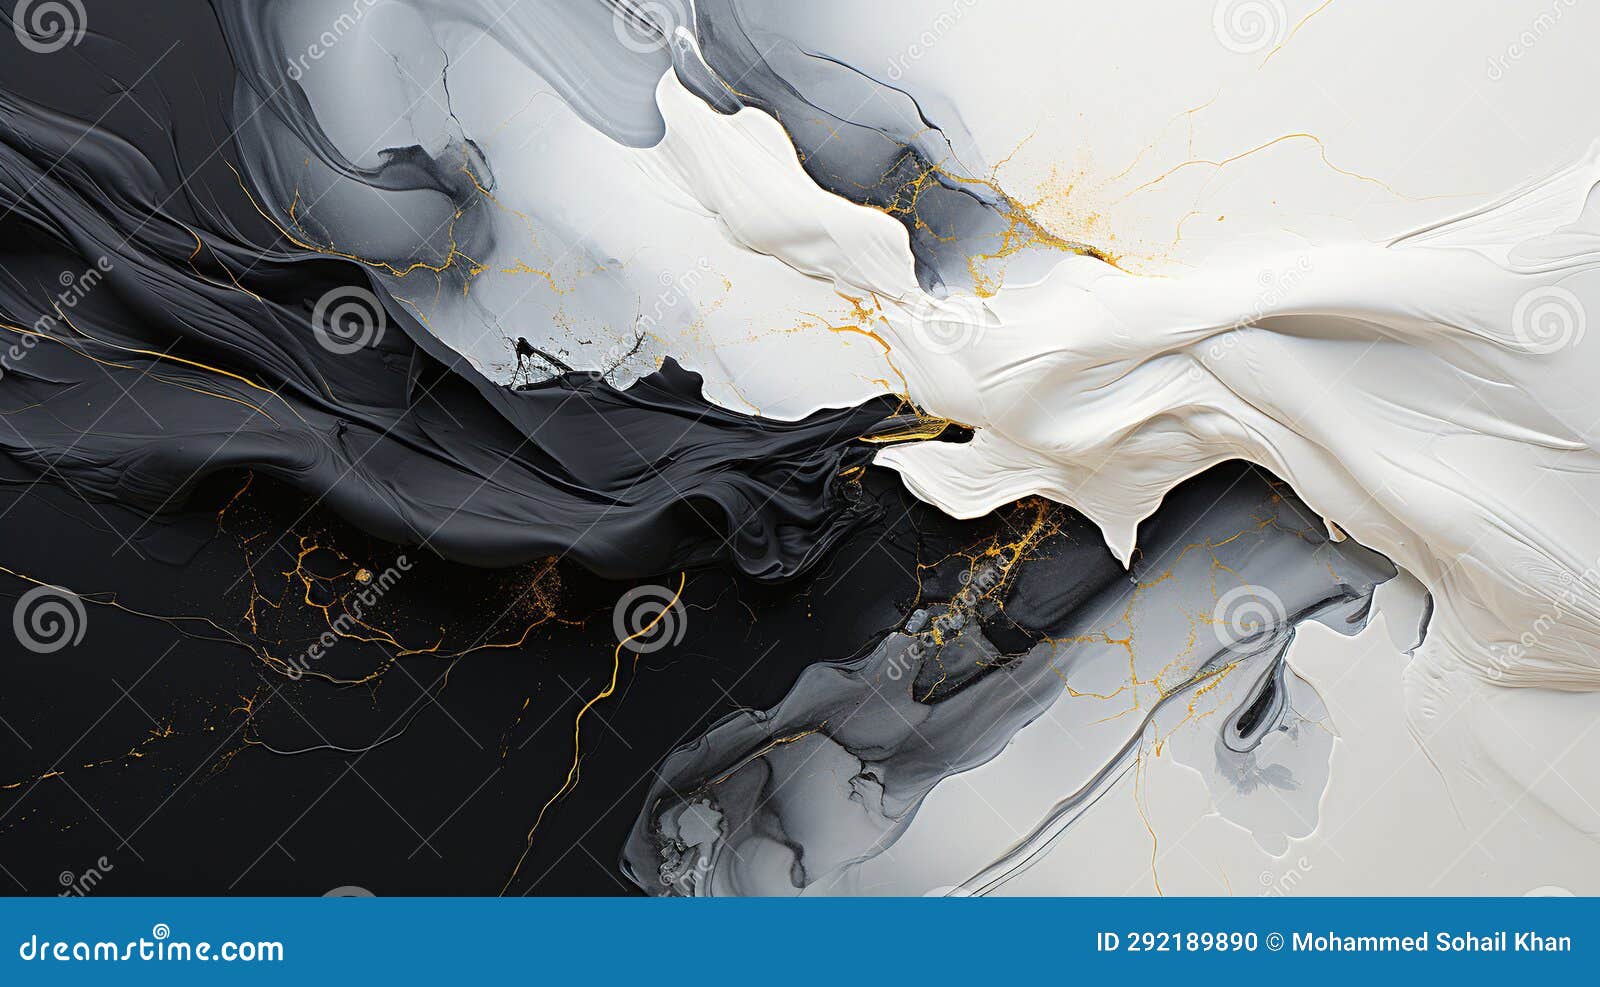 abstract art black with white blizard line in middle oil painting background